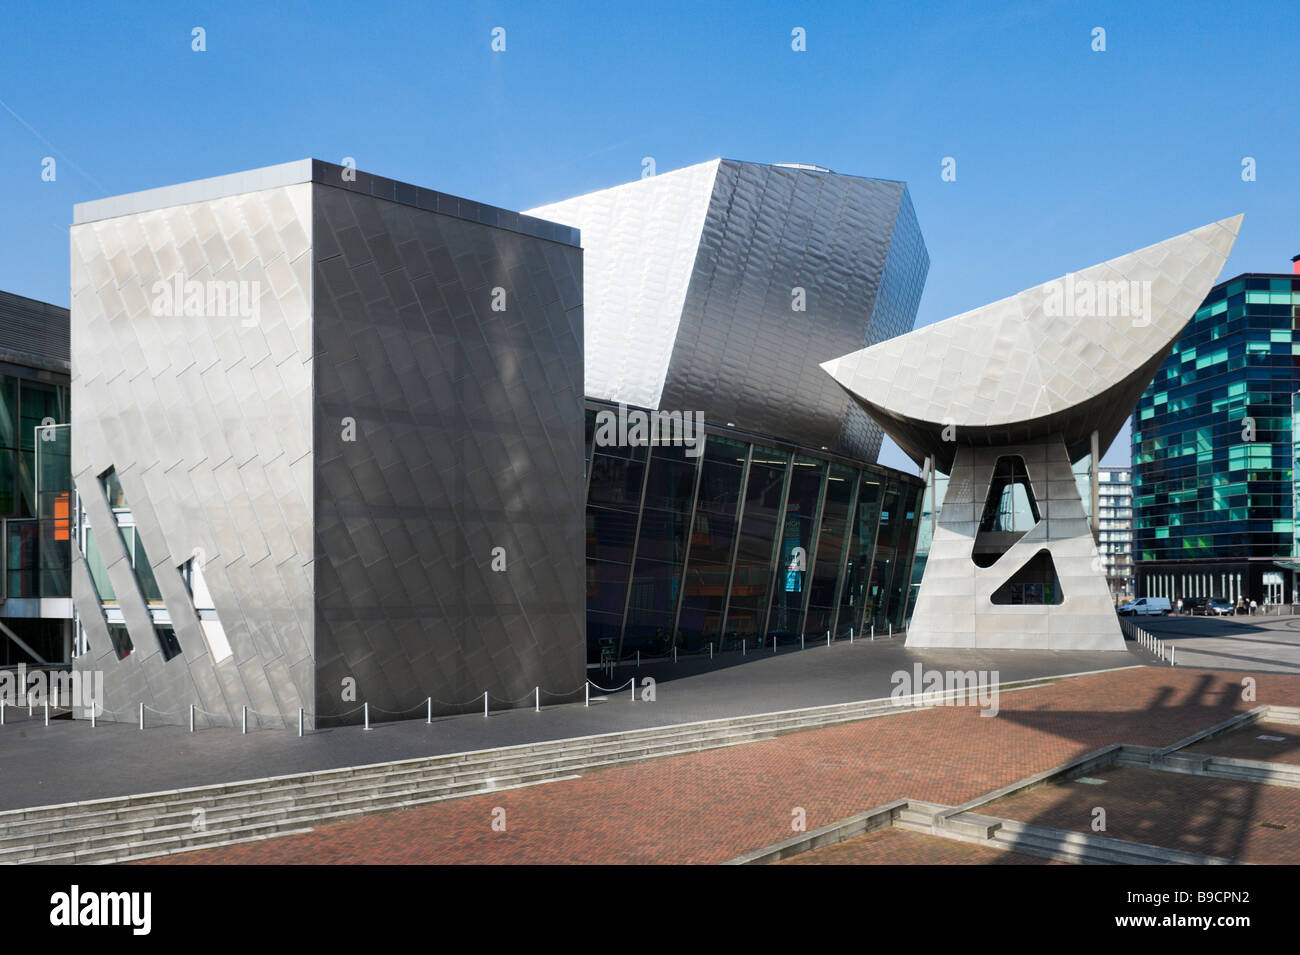 Le Lowry Art Gallery et le complexe de loisirs, Salford, Greater Manchester, Angleterre Banque D'Images